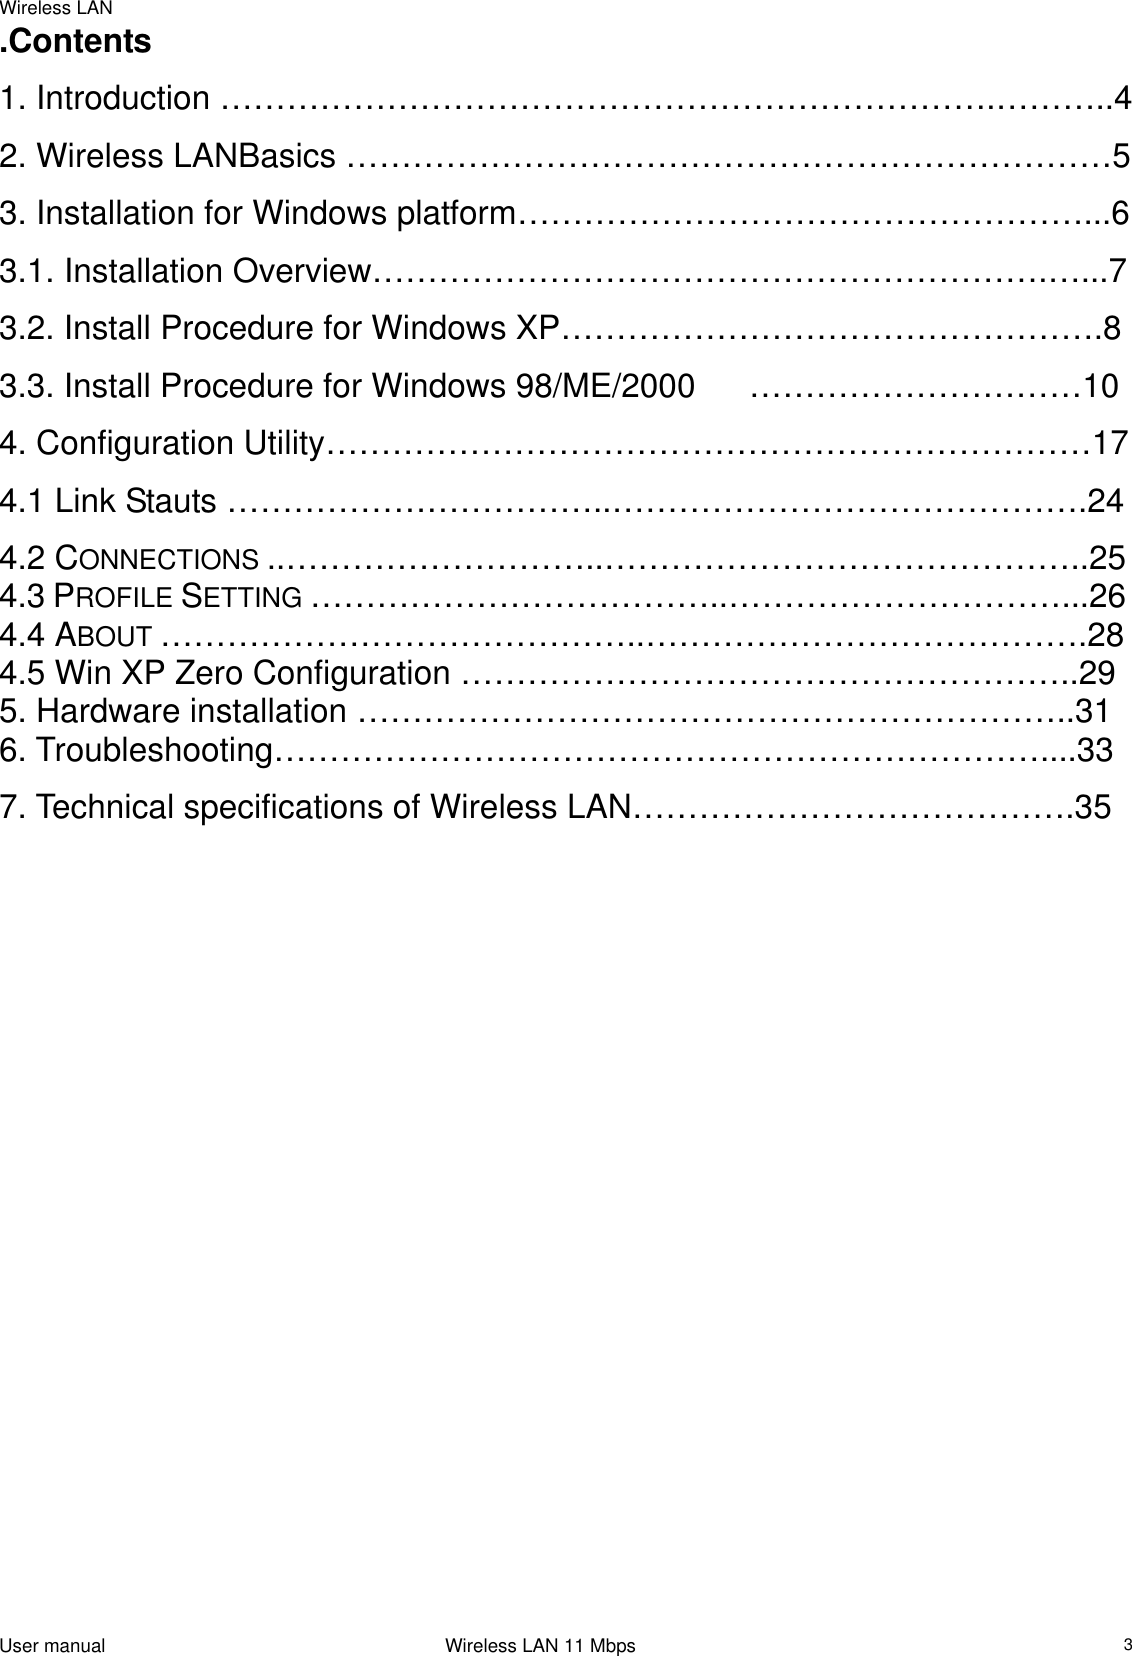 Wireless LAN                                                                                                                                                                                                  .Contents 1. Introduction …………………………………………………………….………..4  2. Wireless LANBasics ……………………………………………………………5 3. Installation for Windows platform……………………………………………...6 3.1. Installation Overview…………………………………………………….…...7 3.2. Install Procedure for Windows XP………………………………………….8 3.3. Install Procedure for Windows 98/ME/2000  …………………………10 4. Configuration Utility……………………………………………………………17 4.1 Link Stauts ……………………………..…………………………………….24 4.2 CONNECTIONS ..………………………..……………………………………..25  4.3 PROFILE SETTING ………………………………..…………………………...26  4.4 ABOUT ……………………………………..………………………………….28  4.5 Win XP Zero Configuration ………………………………………………..29 5. Hardware installation ………………………………………………………..31 6. Troubleshooting……………………………………………………………....33 7. Technical specifications of Wireless LAN………………………………….35                                    User manual                                                                 Wireless LAN 11 Mbps   3